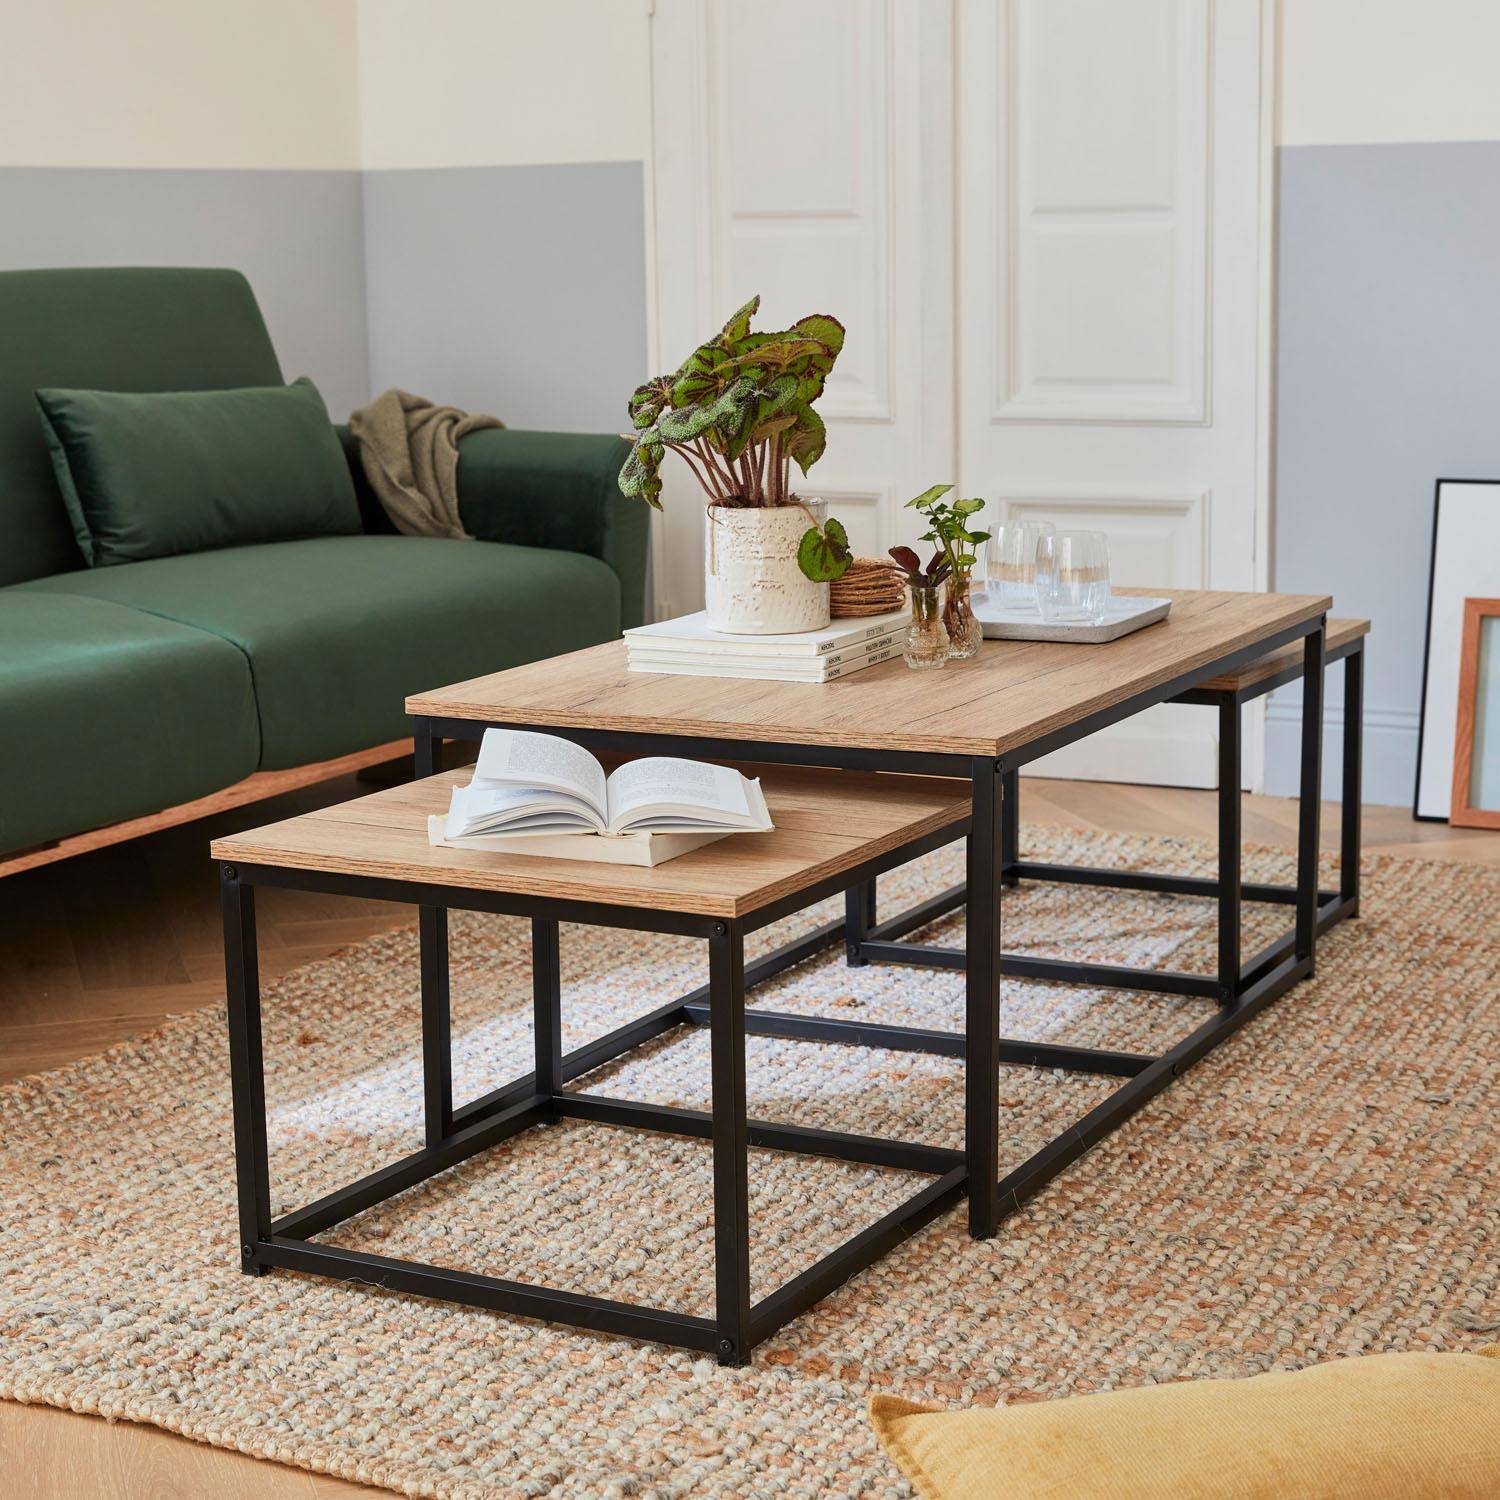 Set of 3 metal and wood-effect nesting tables, large table 100x60x45cm, 2x small tables 50x50x38cm - Loft - Black,sweeek,Photo1